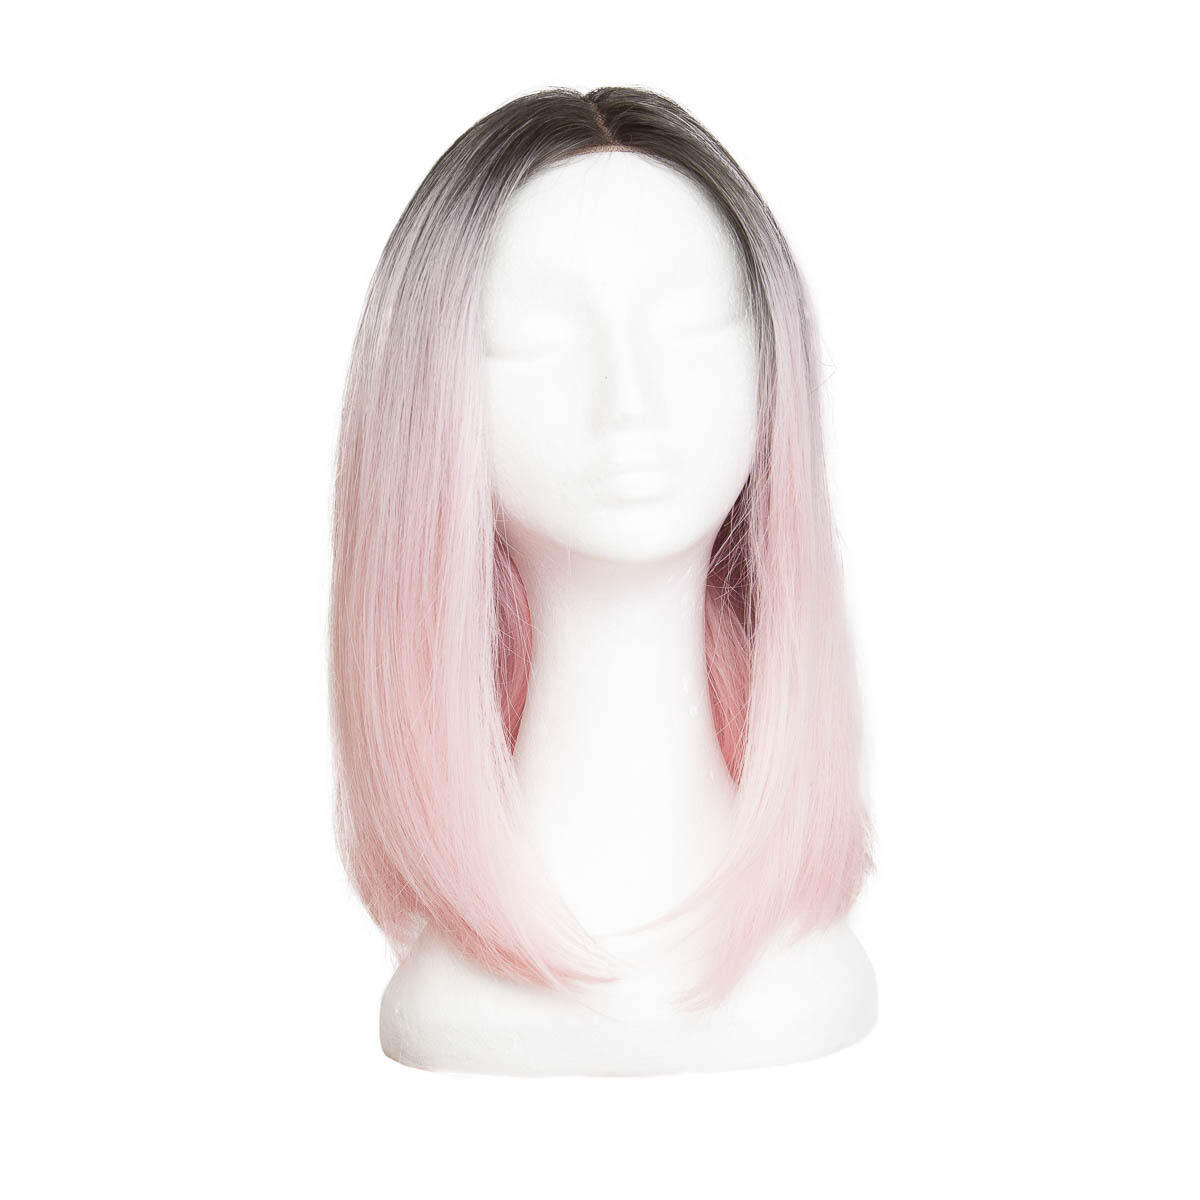 Lace Front Wig Lob O1.2/99.2 Black Brown/Pink 40 cm